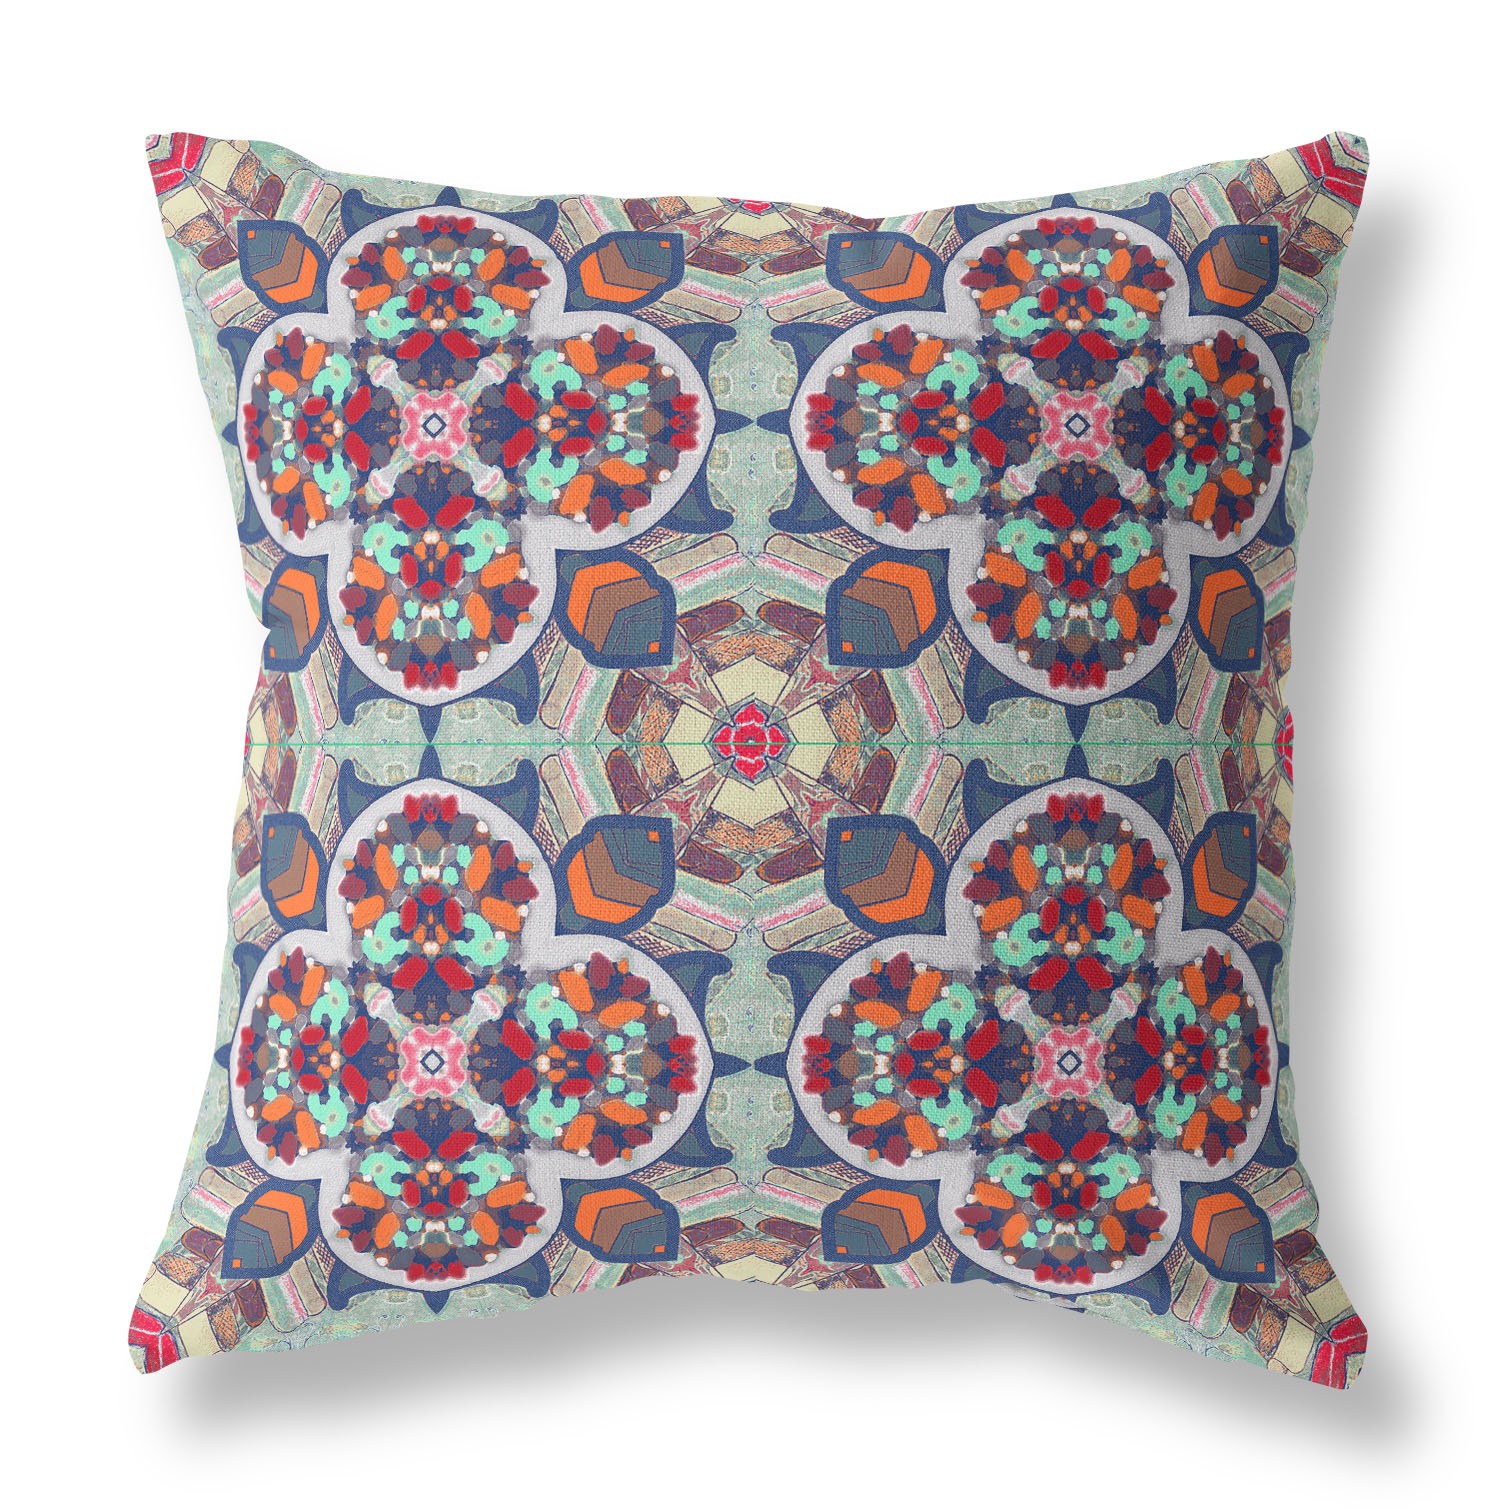 20" X 20" Blue And Orange Zippered Geometric Indoor Outdoor Throw Pillow Cover & Insert-417718-1